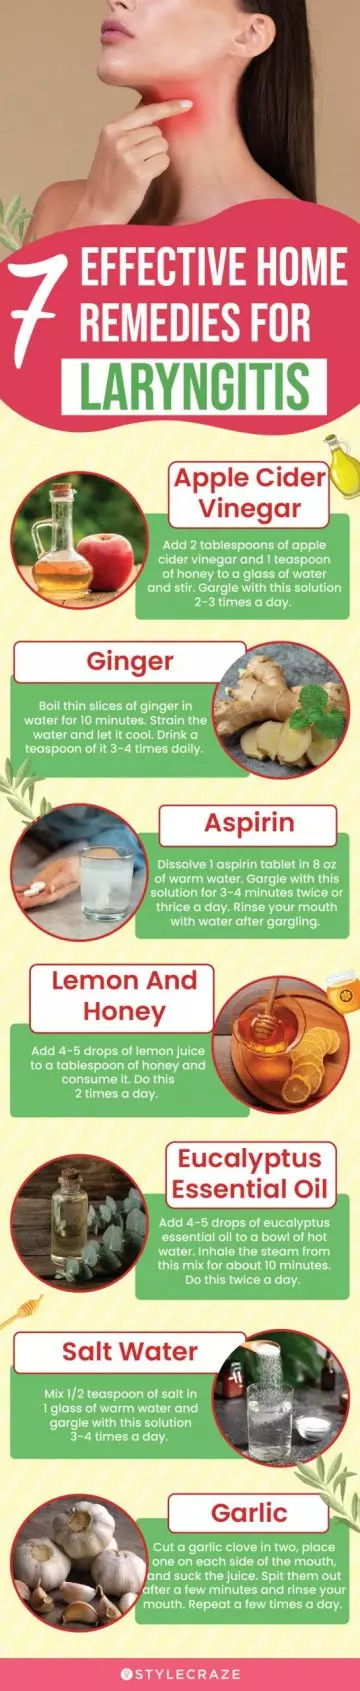 7 effective home remedies for laryngitis (infographic)